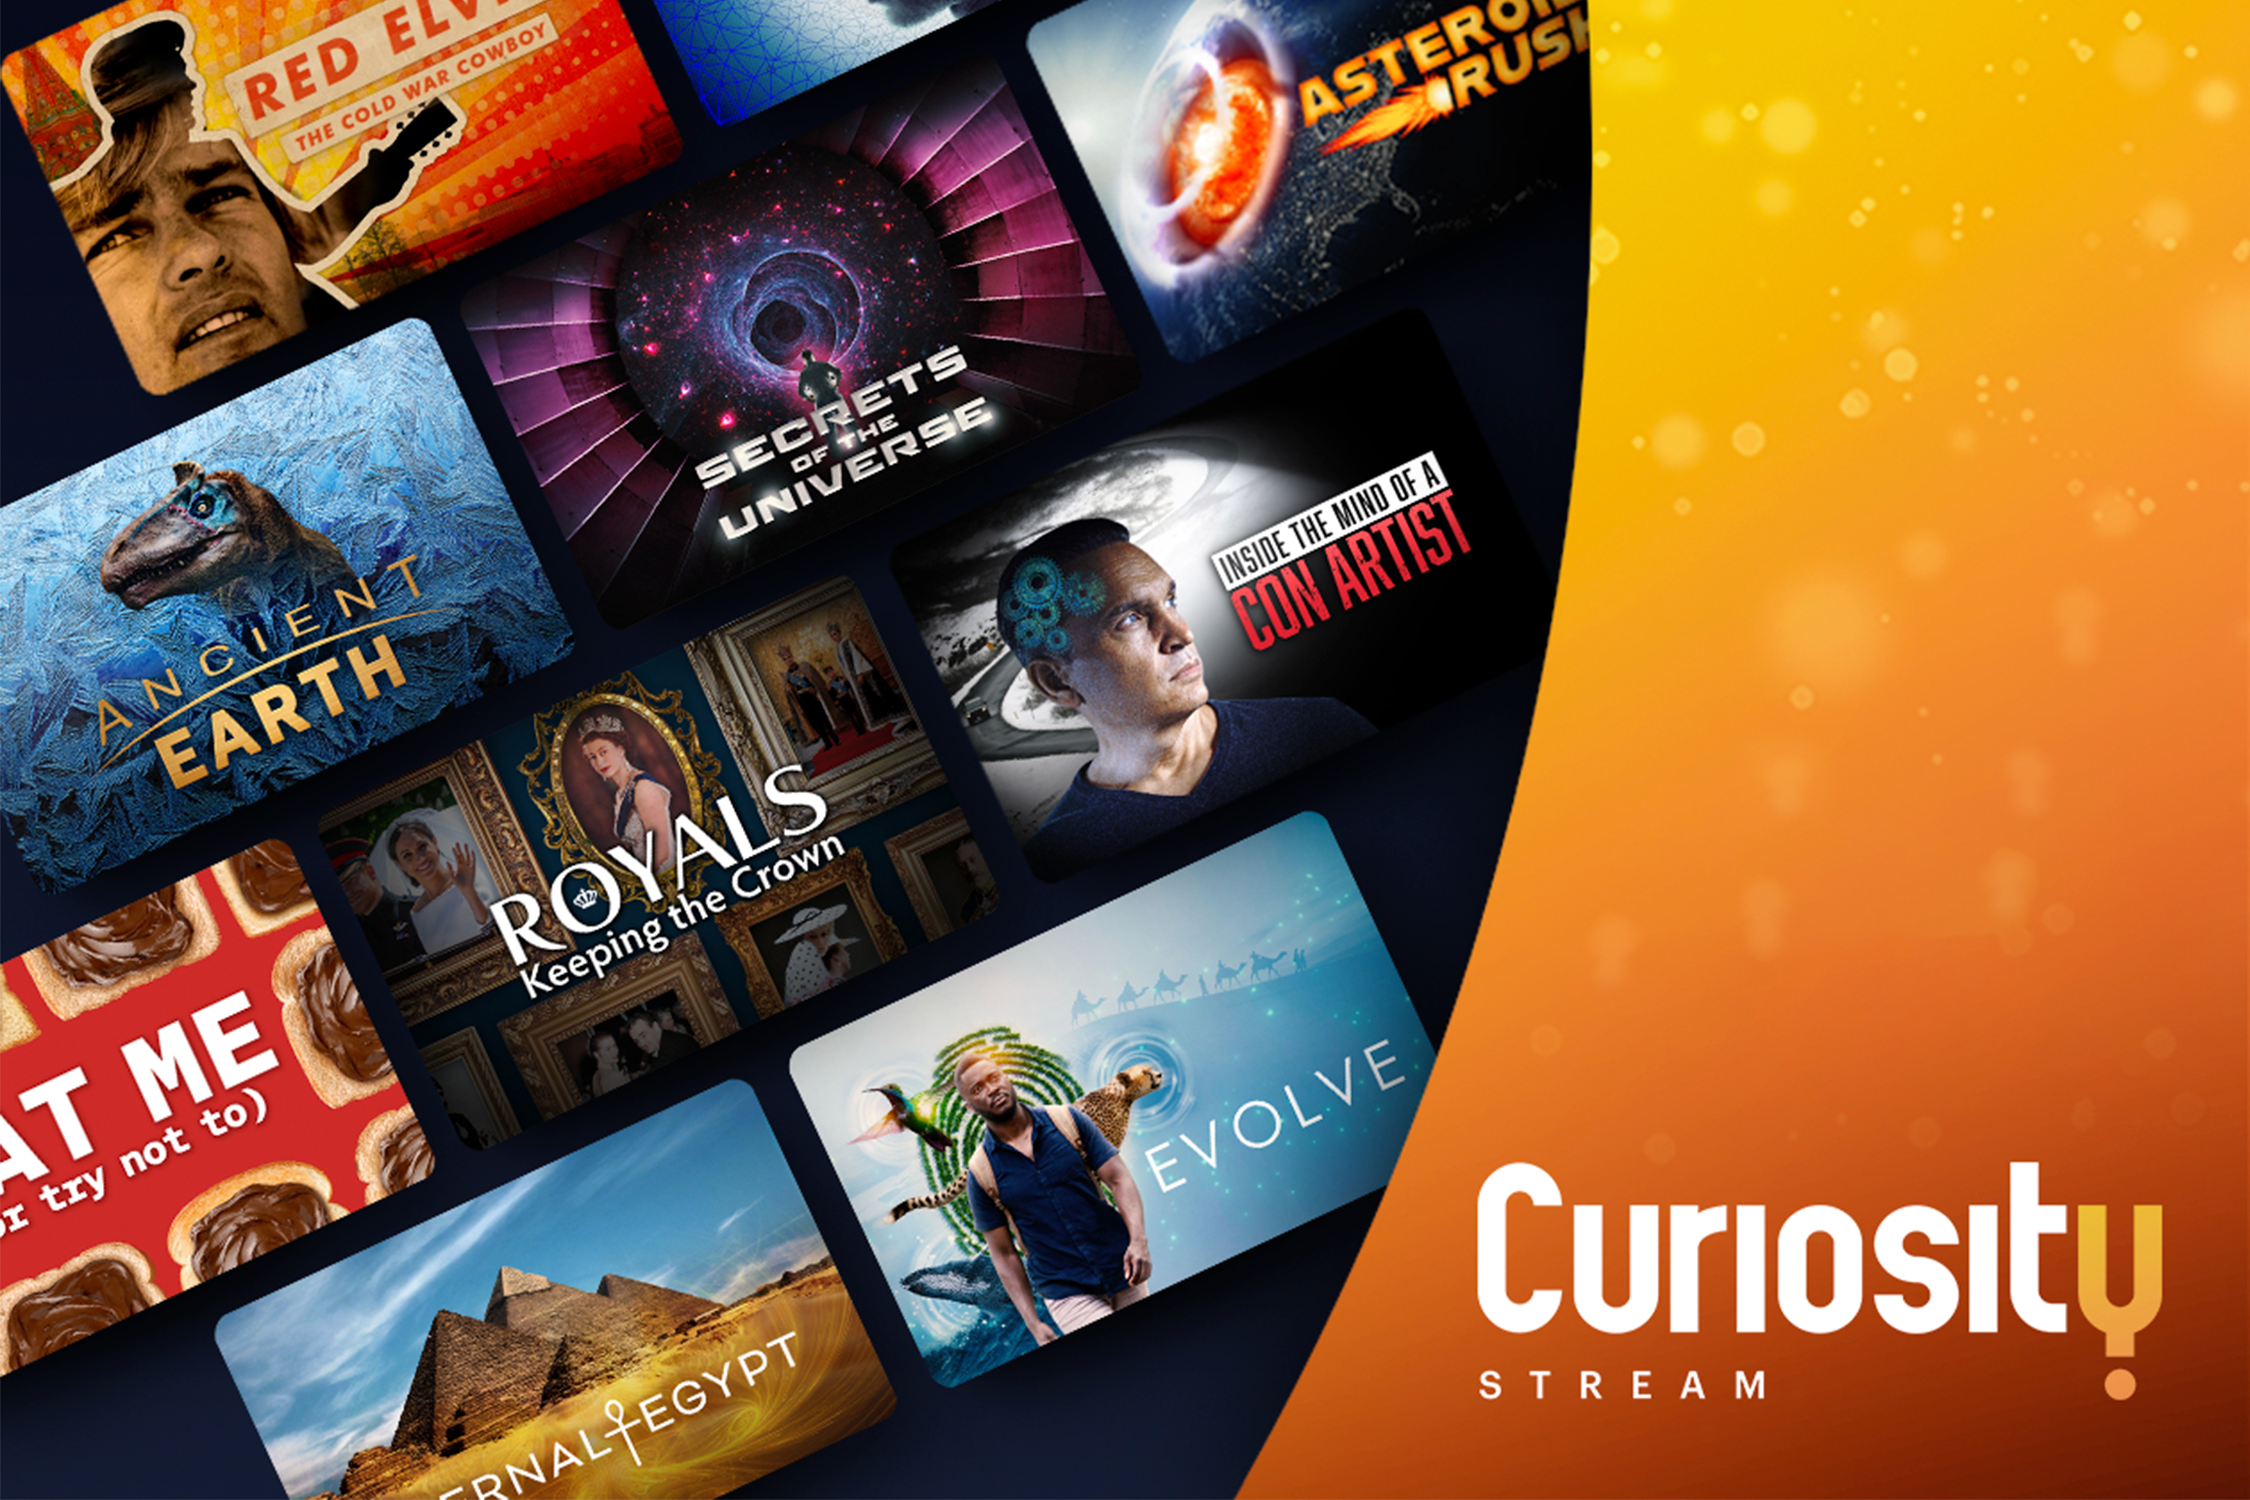 Get 20% off lifetime access to Curiosity Stream’s collection of documentaries